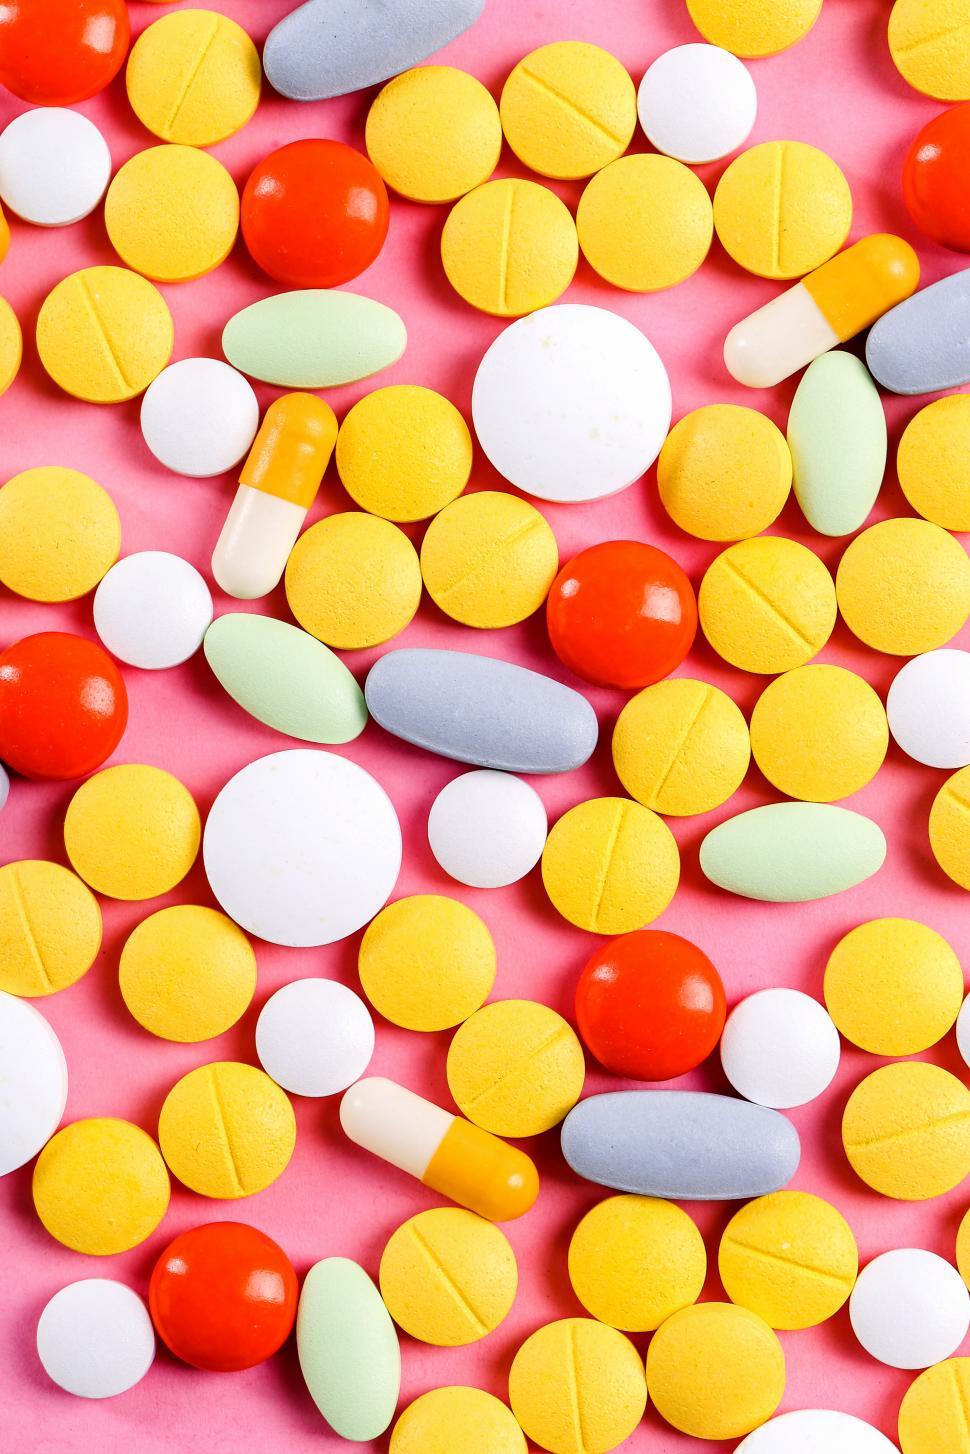 Free Image of Pills and capsules and tablets - background 